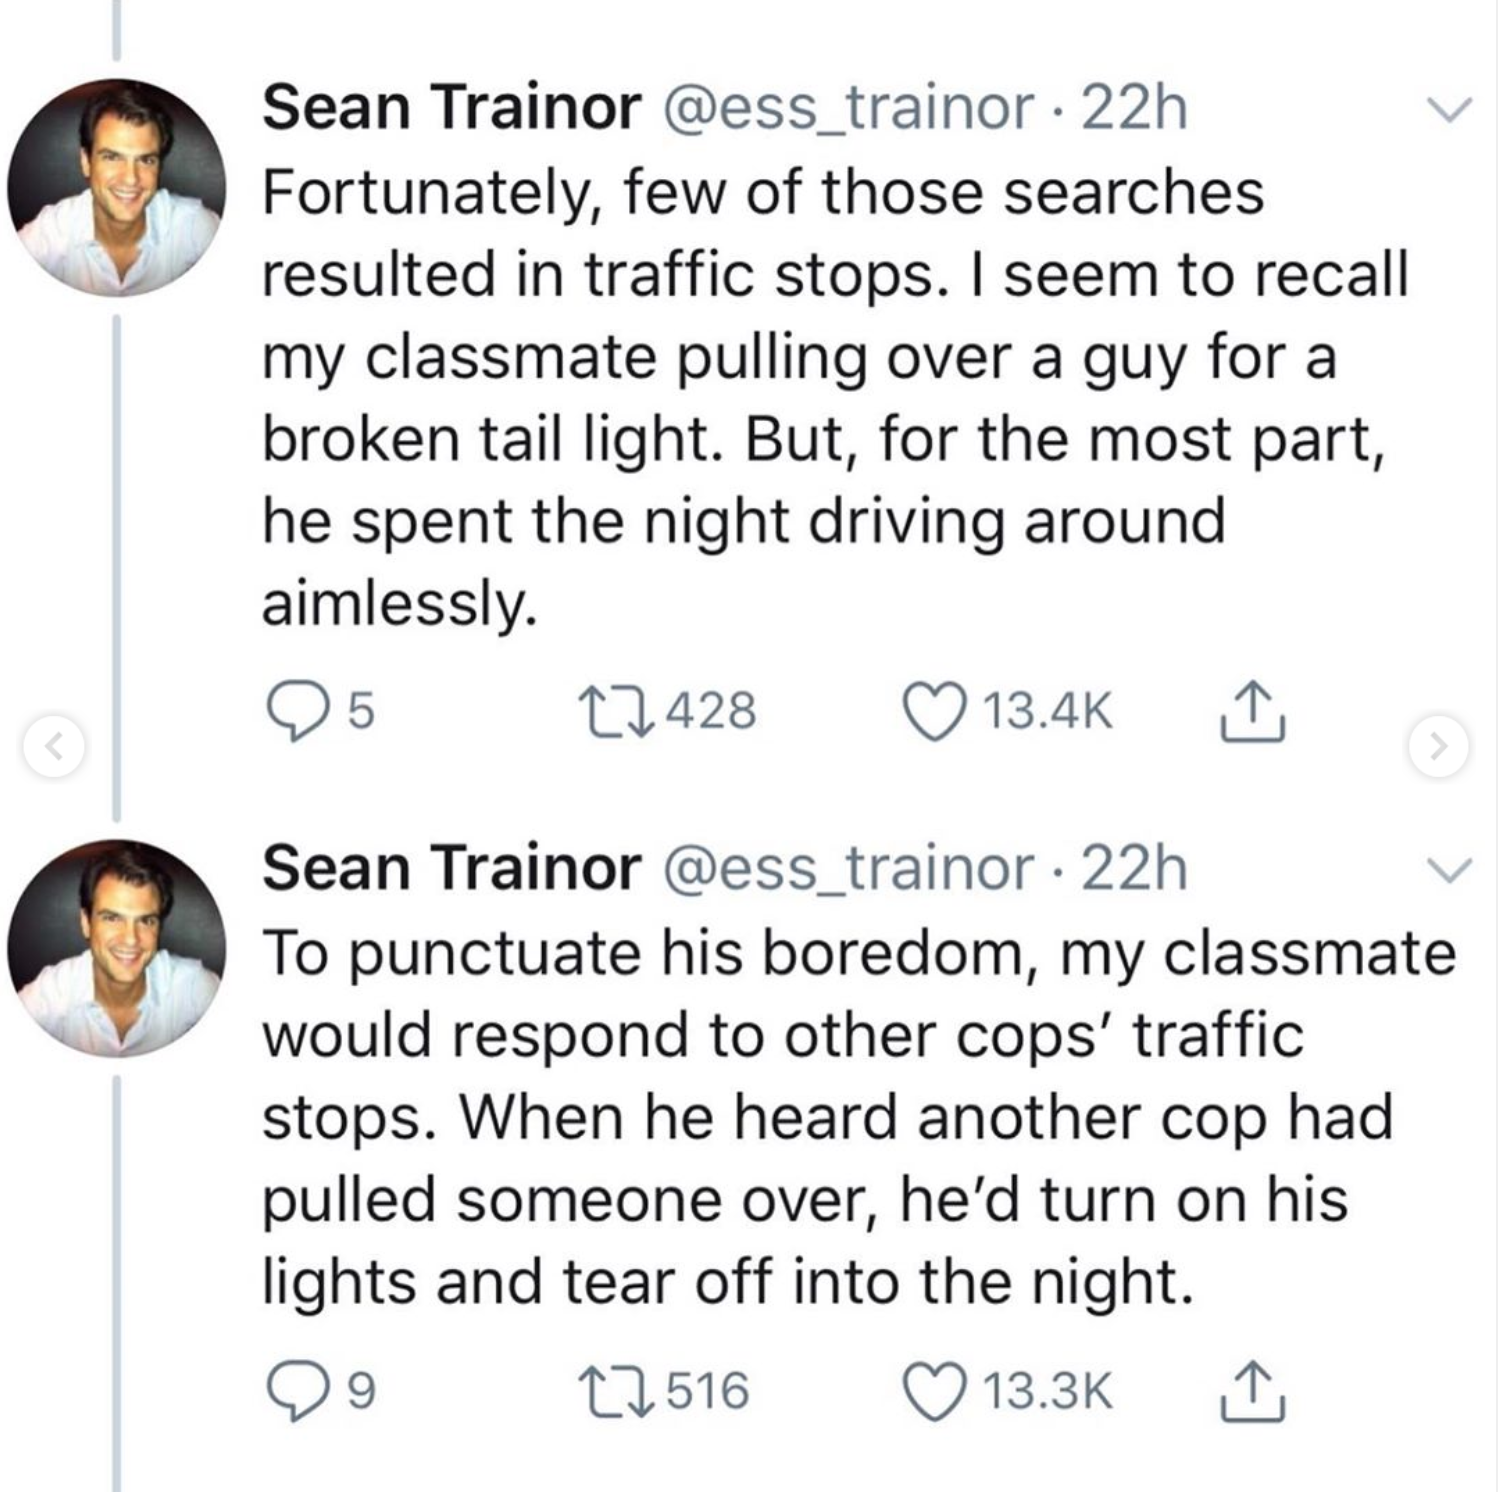 point - Sean Trainor 22h Fortunately, few of those searches resulted in traffic stops. I seem to recall my classmate pulling over a guy for a broken tail light. But, for the most part, he spent the night driving around aimlessly. 5 12428 Sean Trainor 22h 